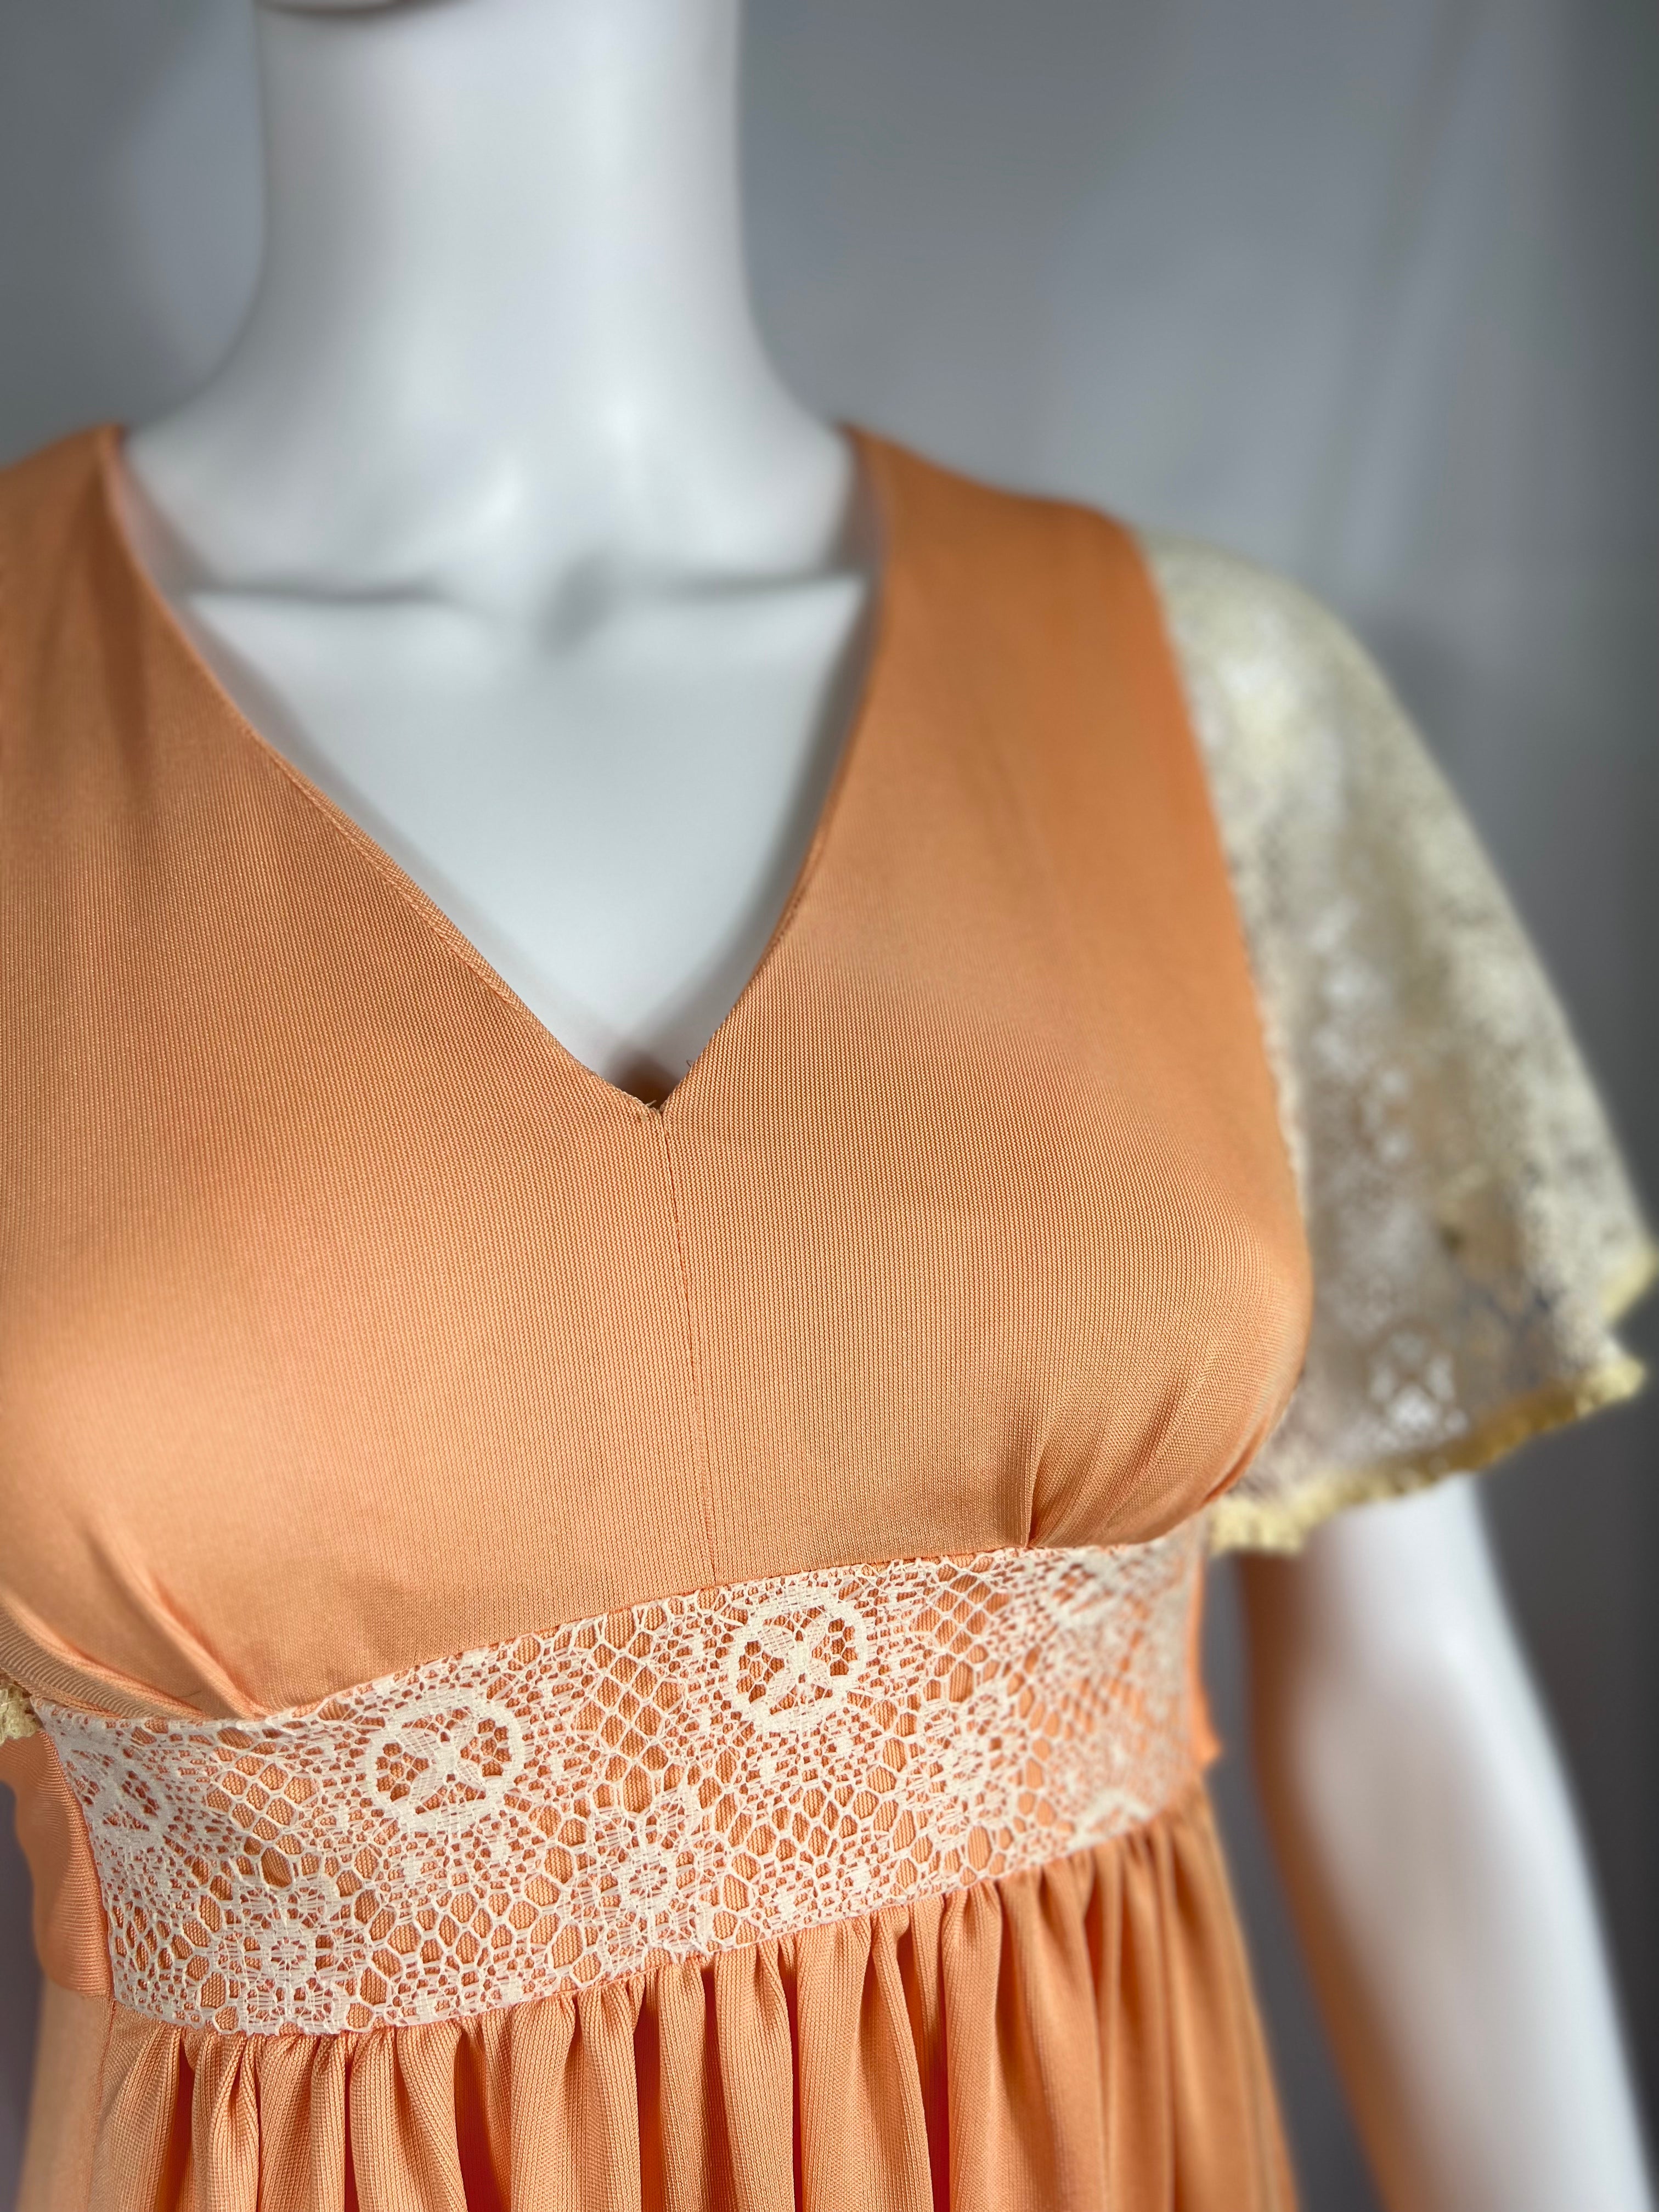 1970's Peach Dress w/ Doiley Lace Sleeves